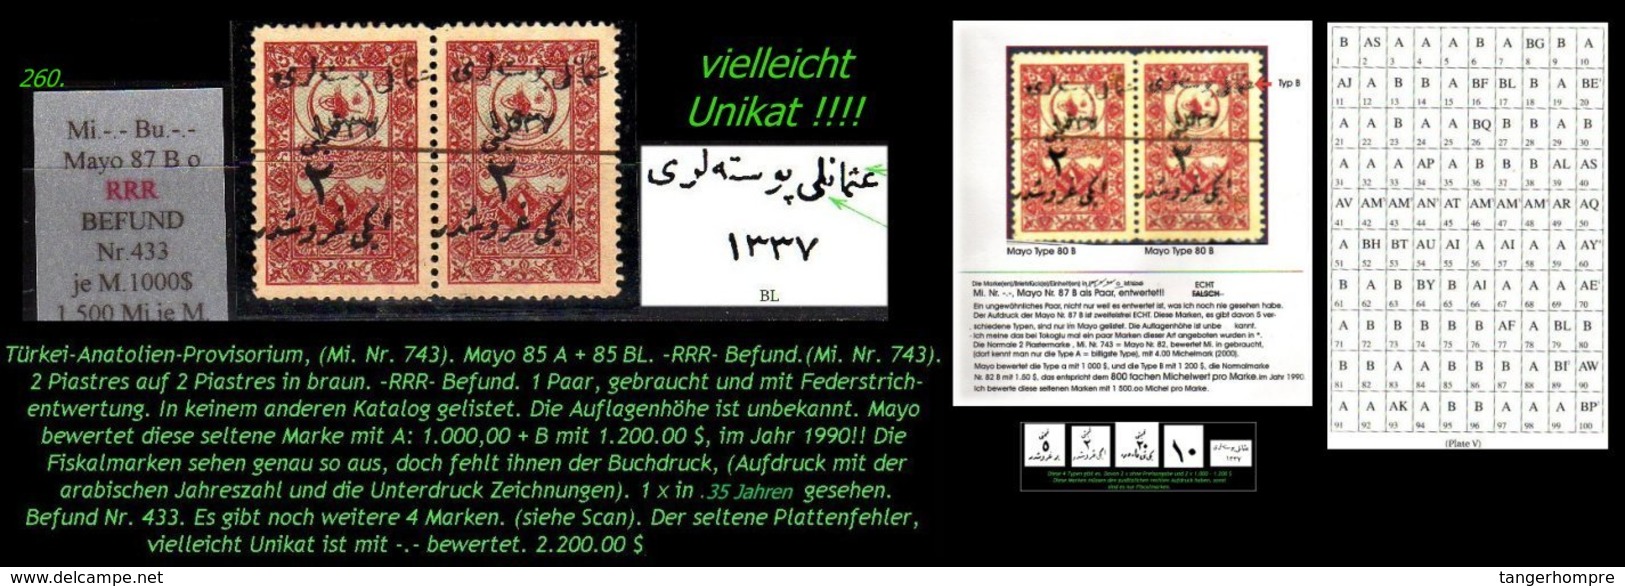 EARLY OTTOMAN SPECIALIZED FOR SPECIALIST, SEE...(Mi. Nr. 743) - Mayo 87 B + BL -RRRR- UNICAT ??? - 1920-21 Kleinasien